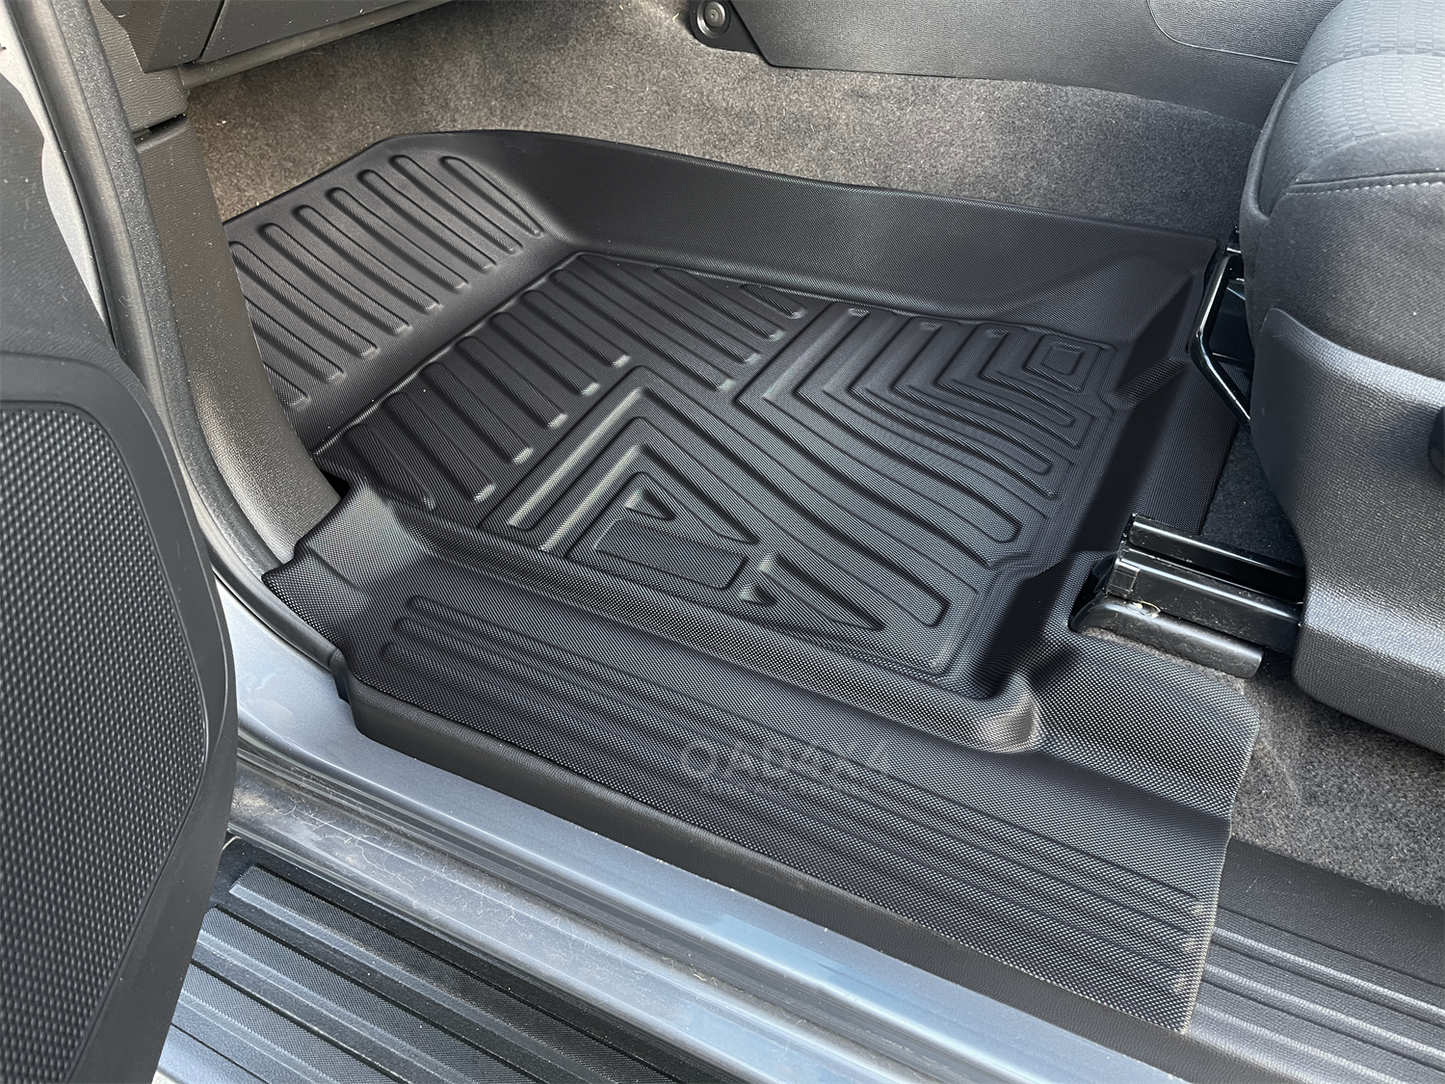 Floor Mats for Holden Colorado RG Single / Extra Cab 2012-Onwards Tailored TPE 5D Door Sill Covered Car Floor Mat Liner